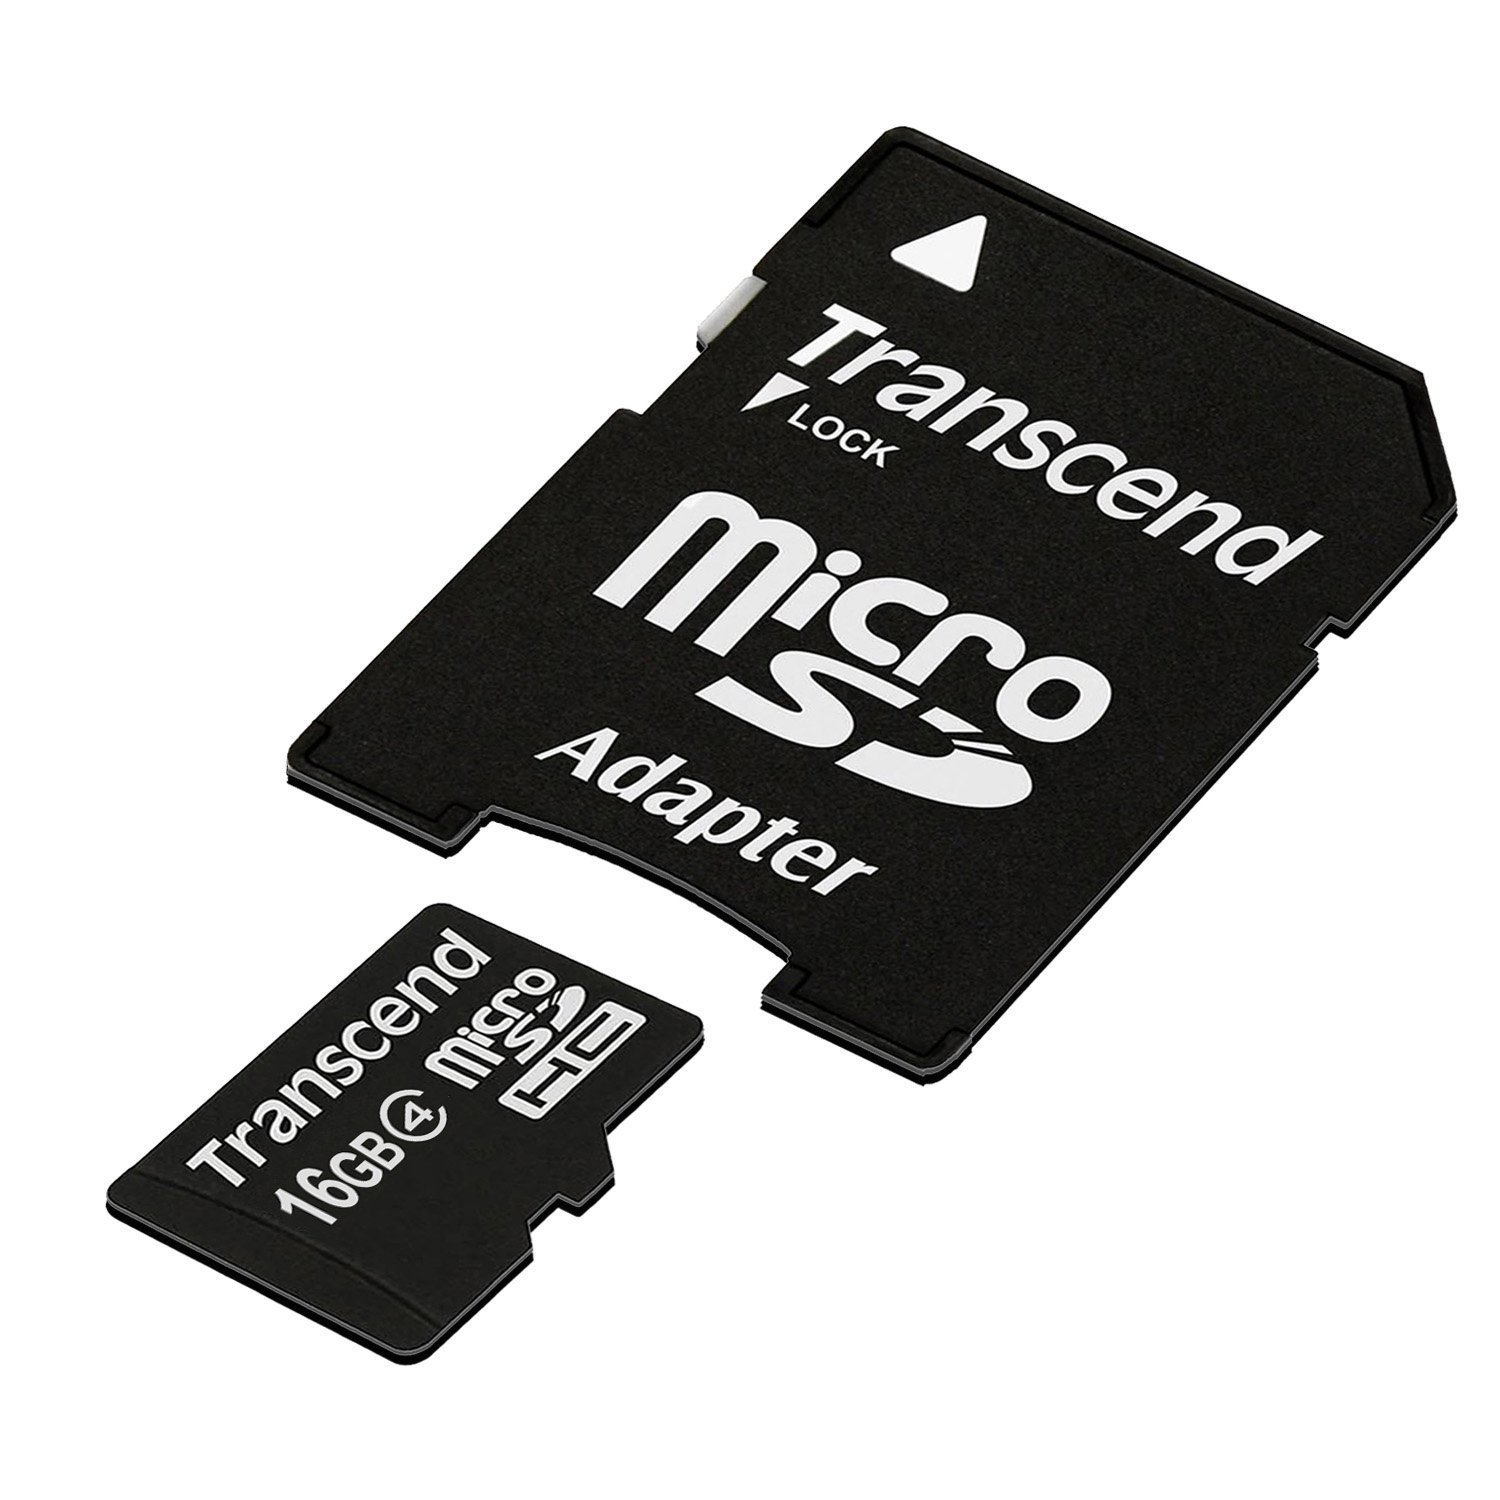 Transcend 16 GB Class 4 microSDHC Flash Memory Card with Adapter ...